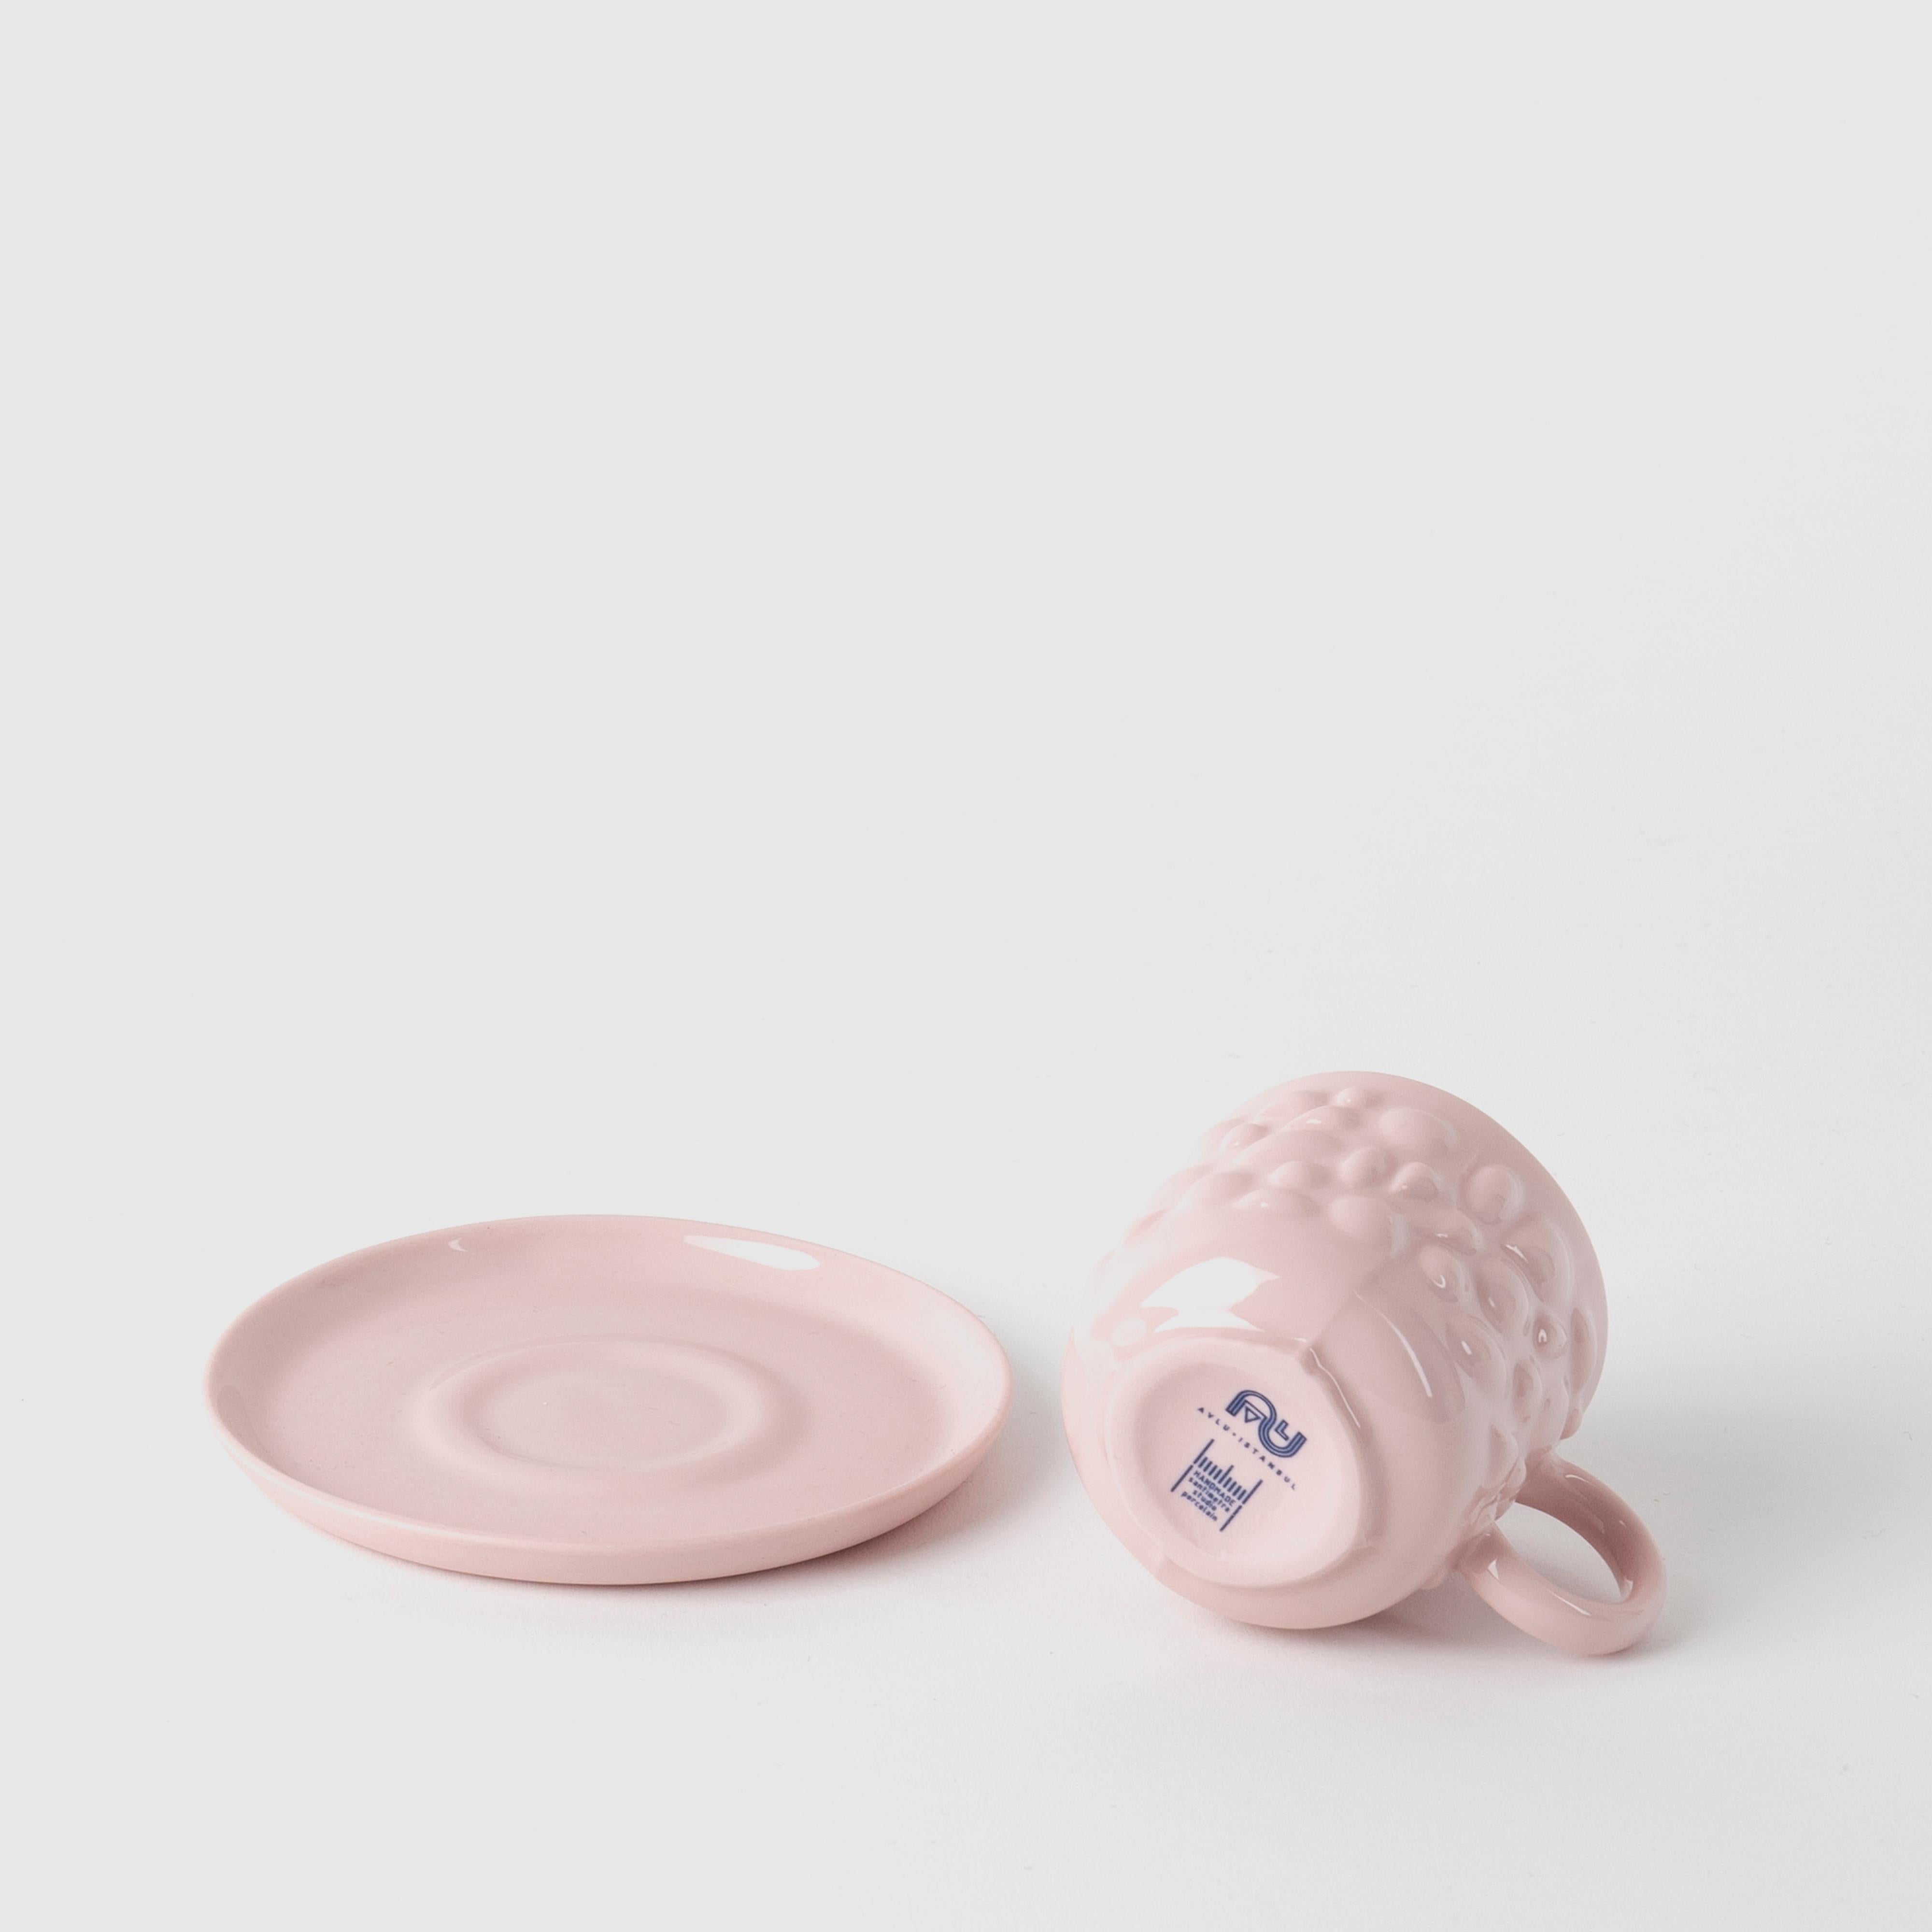 Justine porcelain pieces are inspired by the ancient Byzantine jewelry. Delicate porcelain transforms cups into timeless design objects by translating pearl and stone details of jewelry into flowing forms.

With their pastel colors and delicate